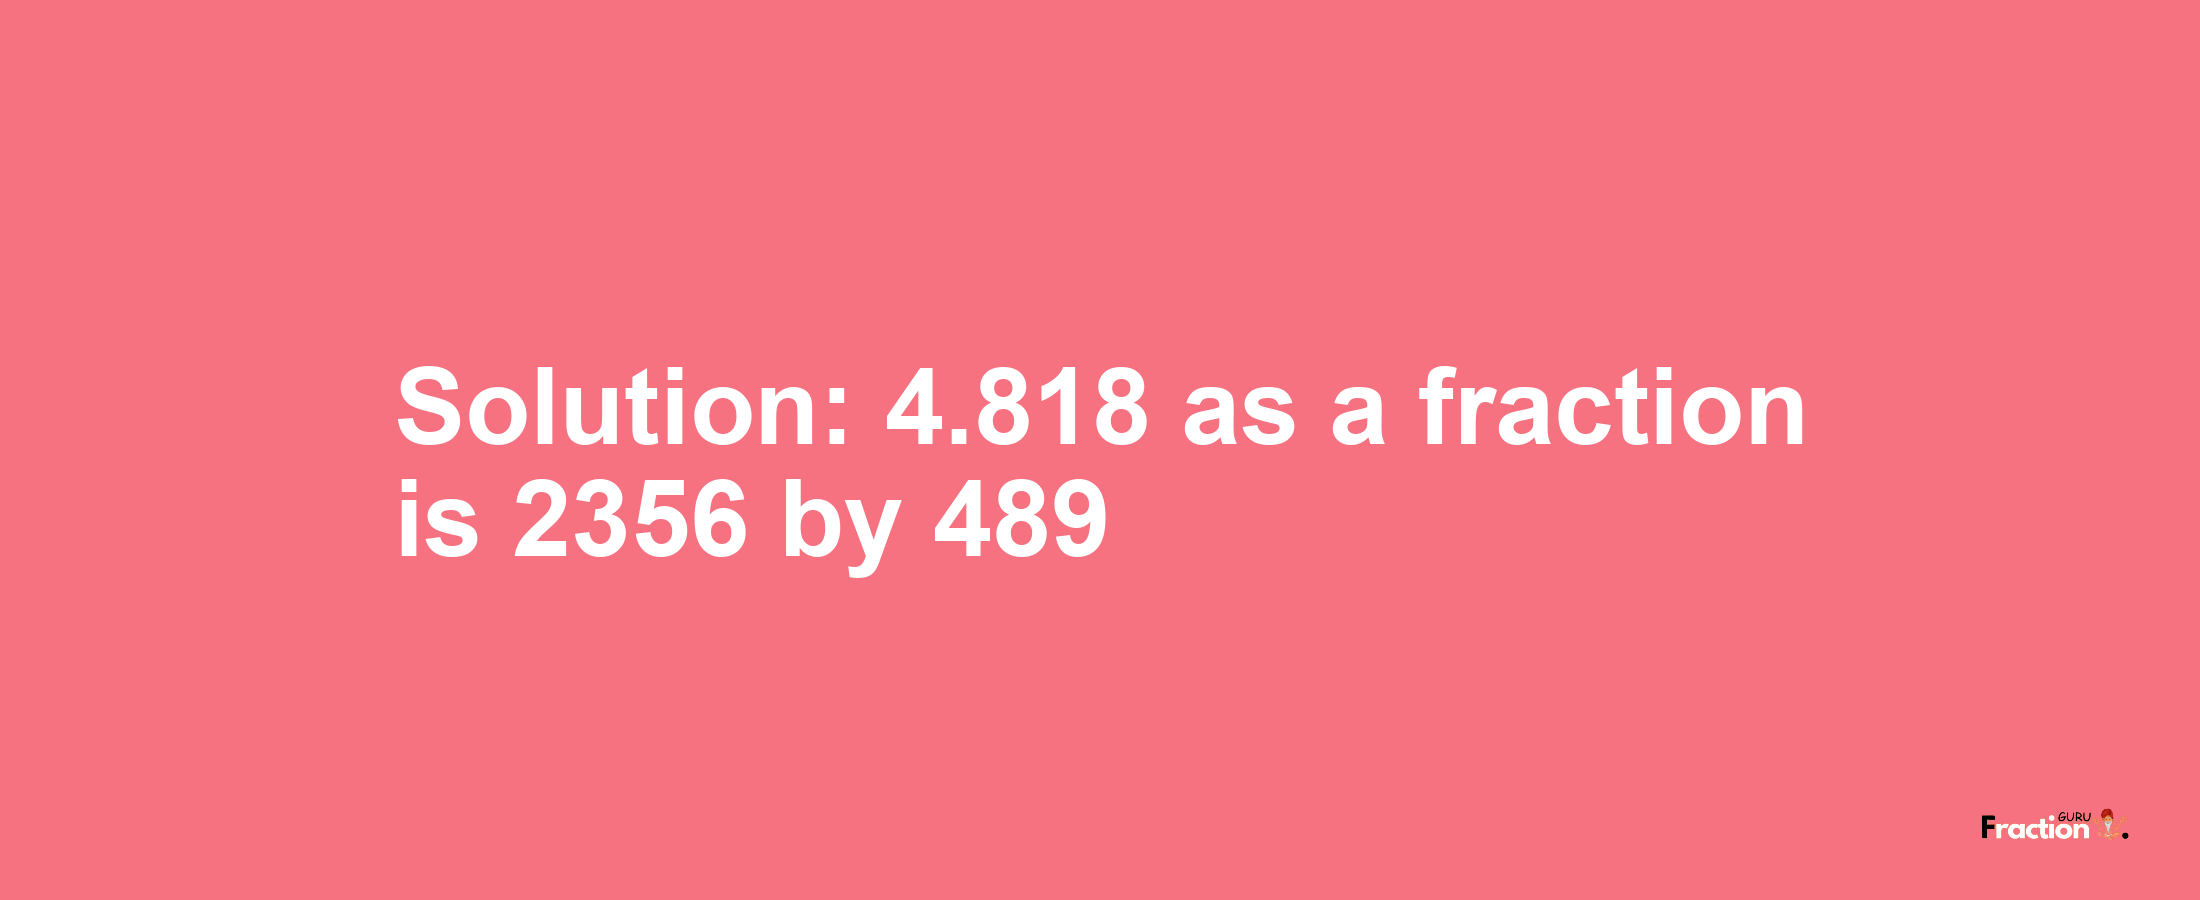 Solution:4.818 as a fraction is 2356/489